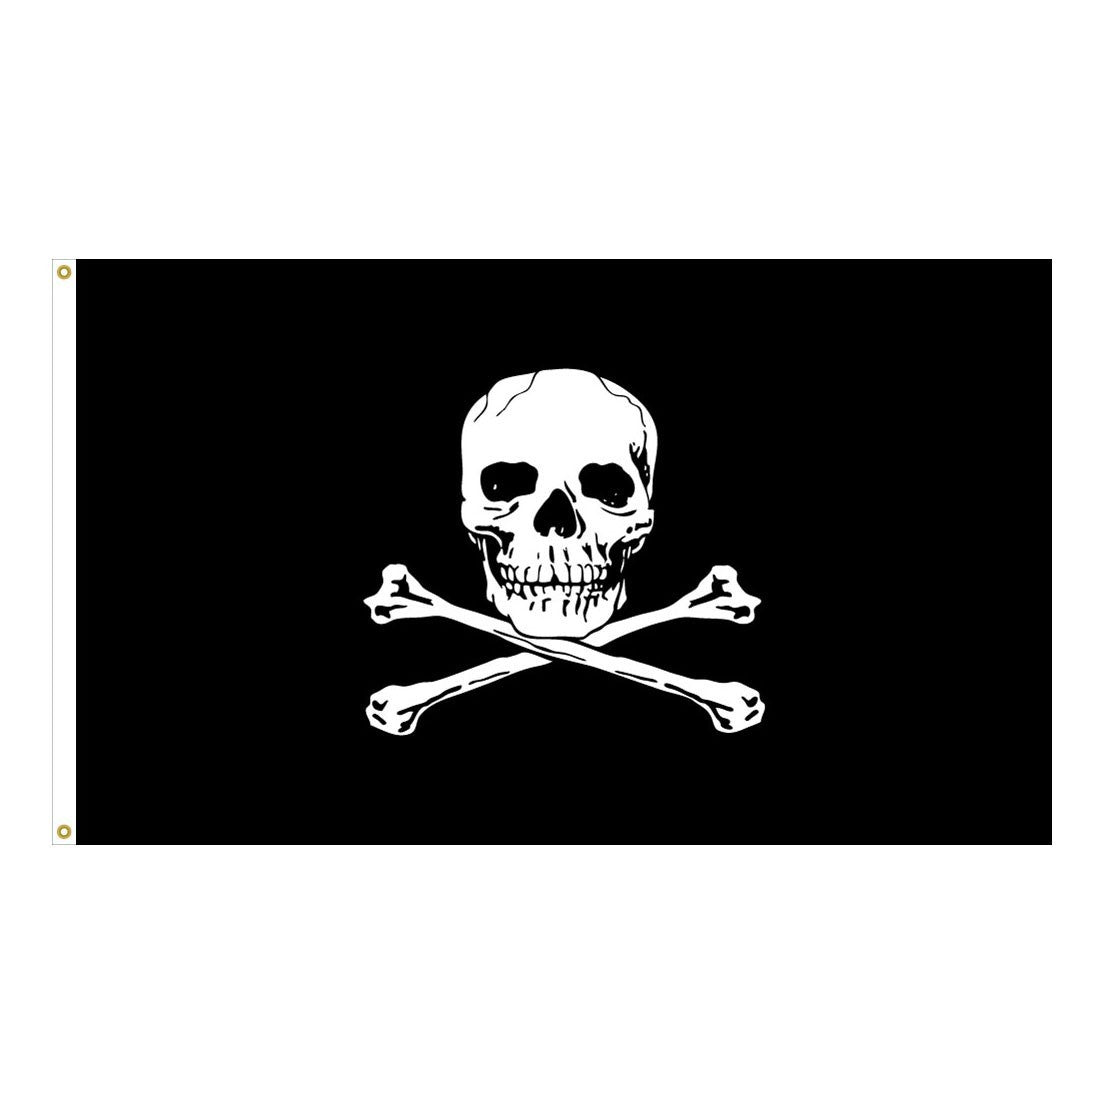 Pirate flag, pirate flags, jolly roger pirate flag